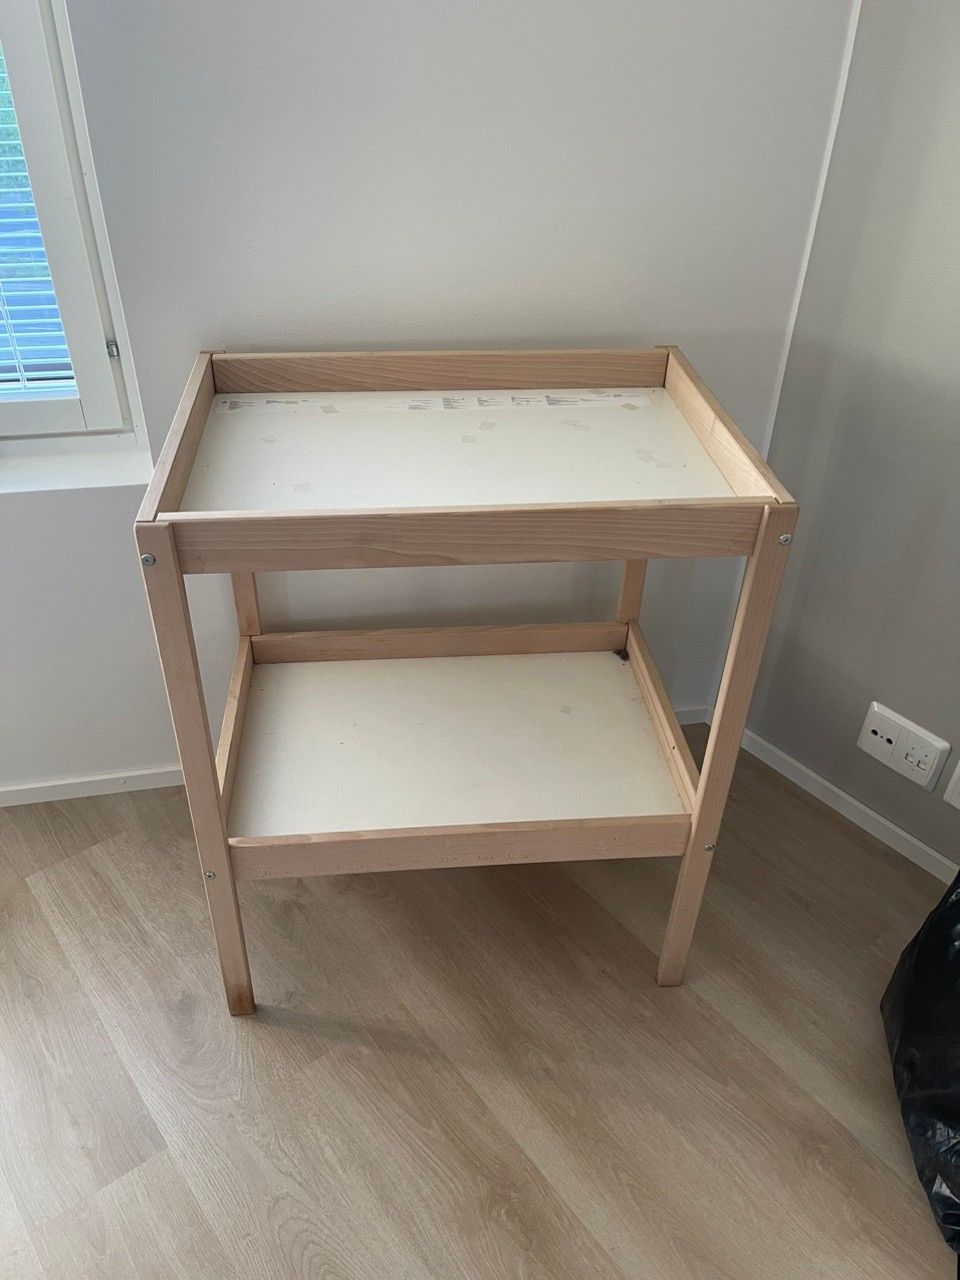 Table for the baby